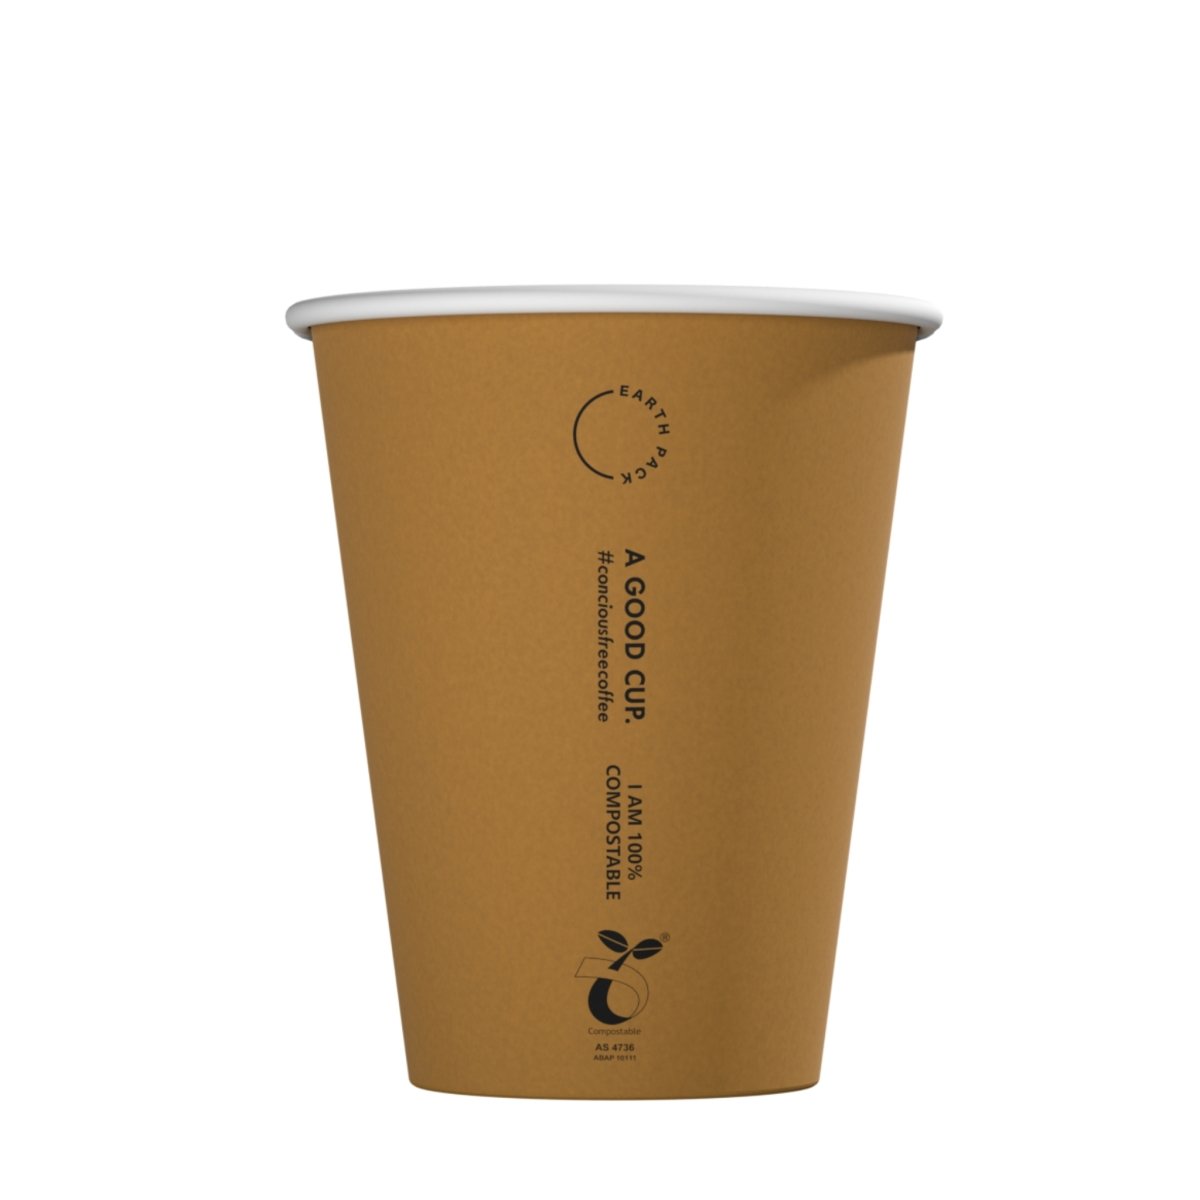 Kraft eco friendly compostable coffee cup